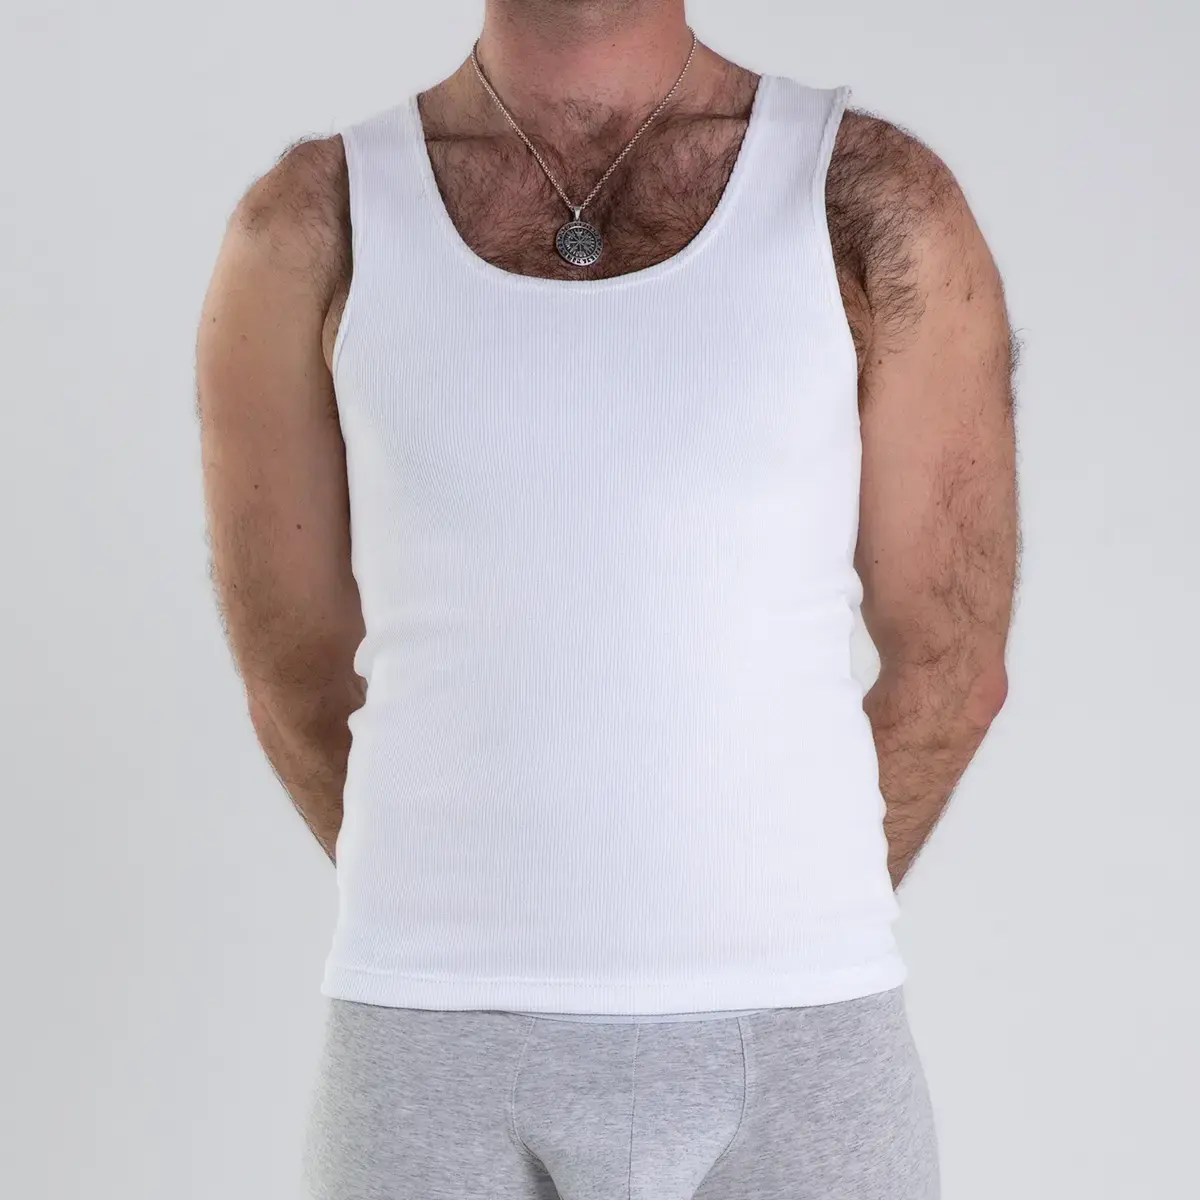 Bundle with a White Singlet